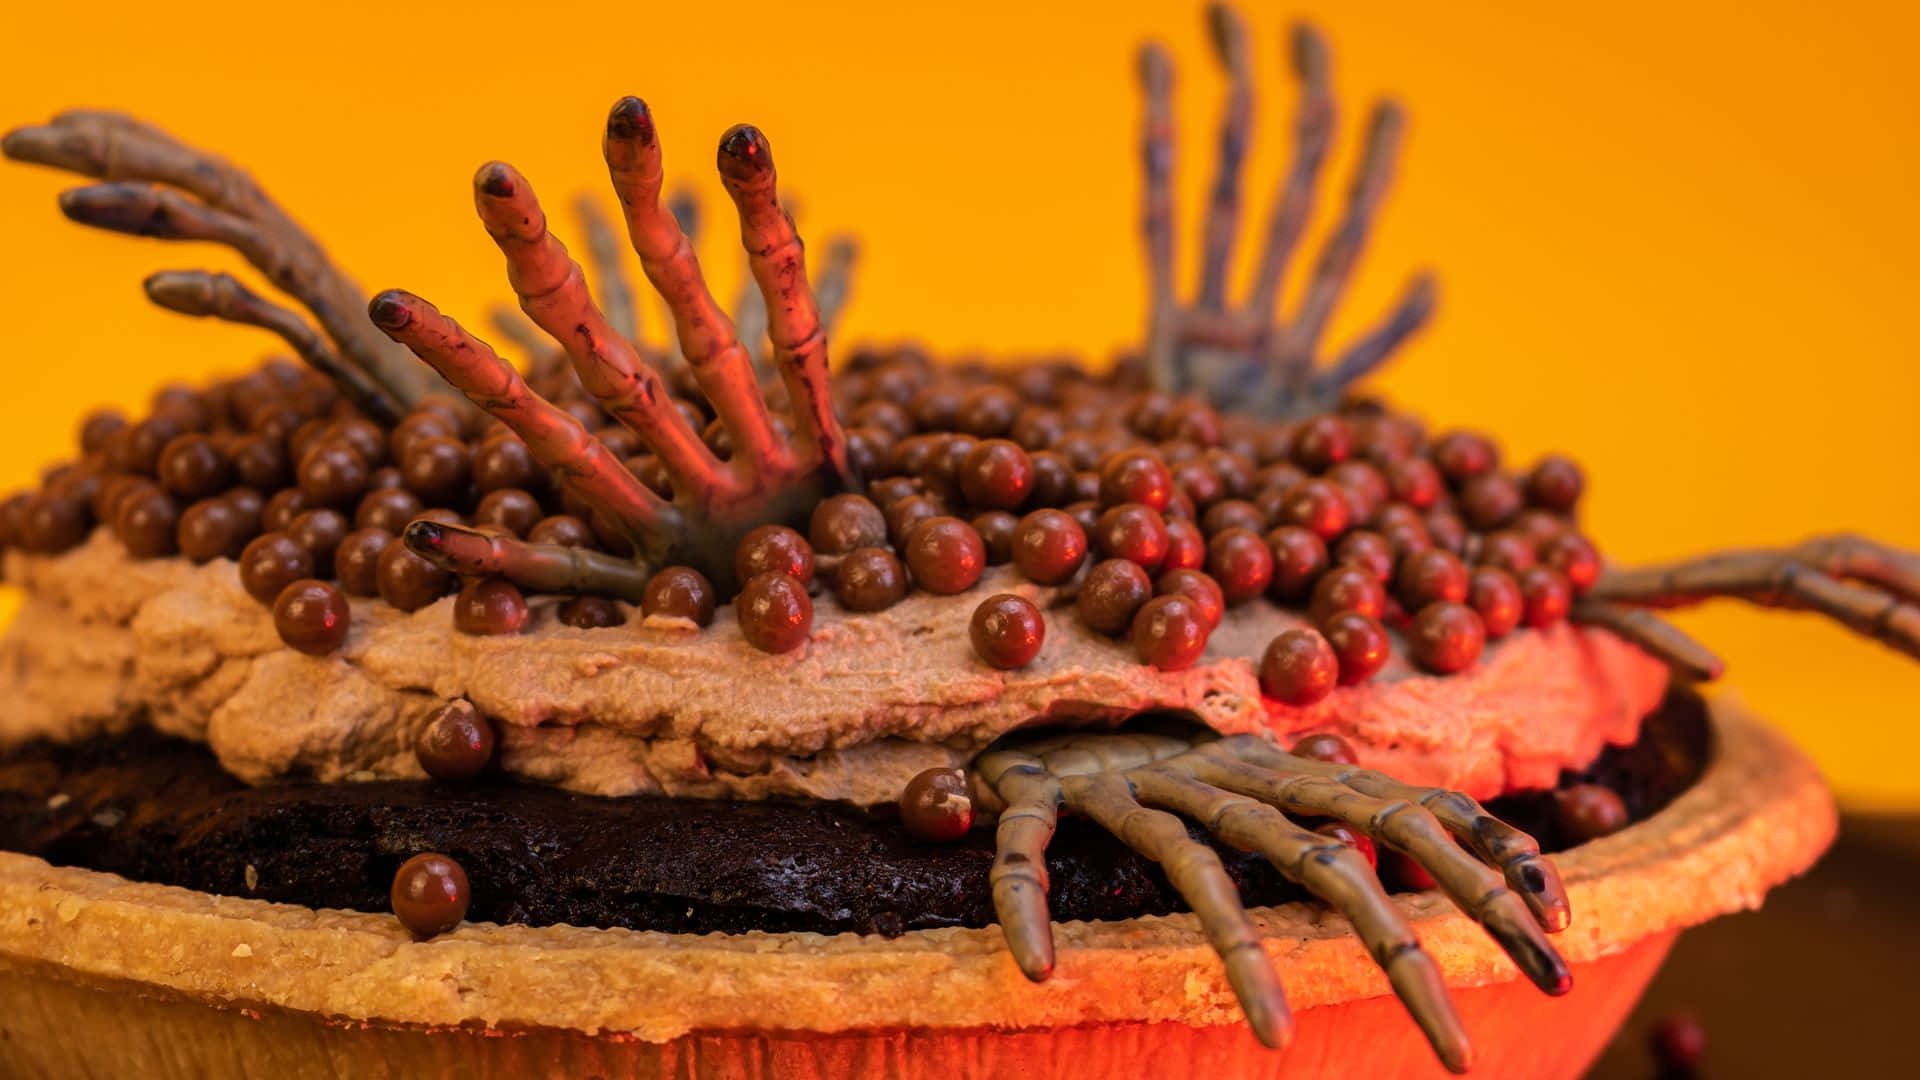 Delight your taste buds with this delicious Halloween cake! Wallpaper